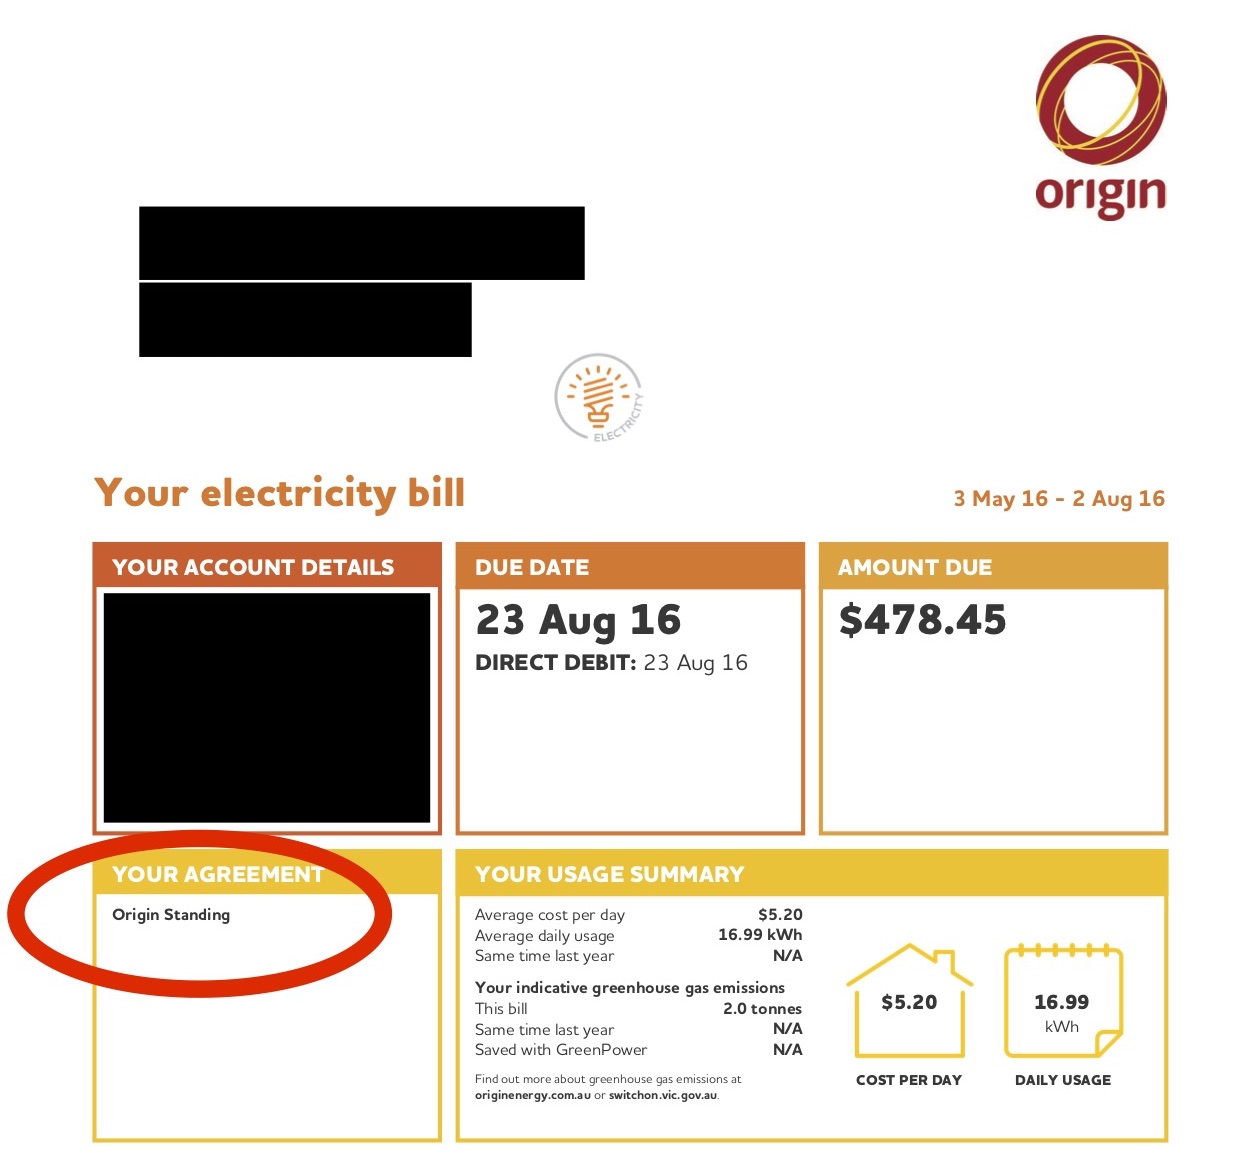 Compare Electricity Prices - The Front Page of an Origin Bill